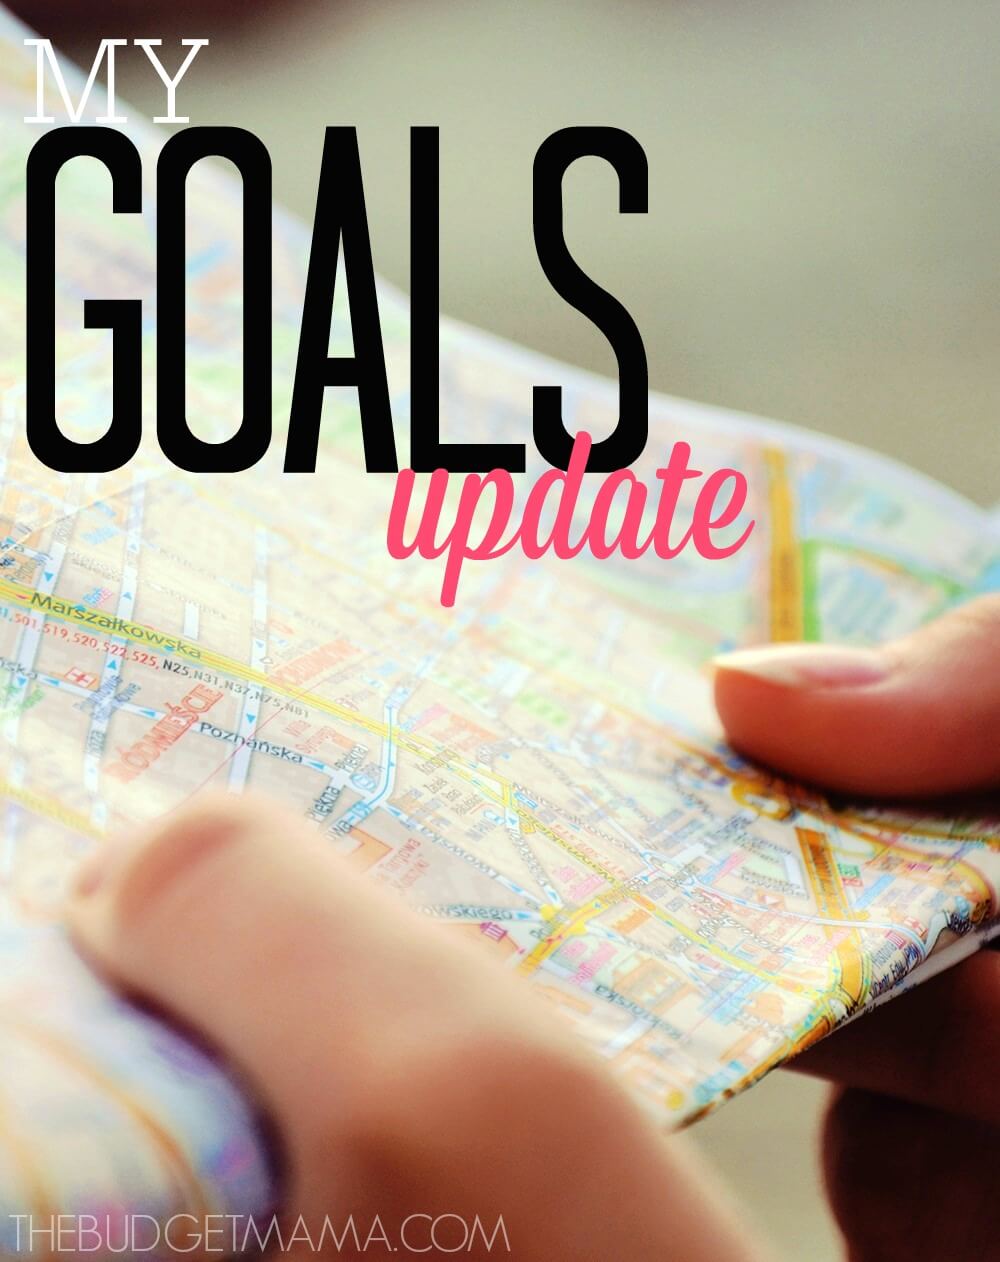 These are my 2015 goals where I share my blogging income and how I made money blogging along with my personal and financial goals for the year.